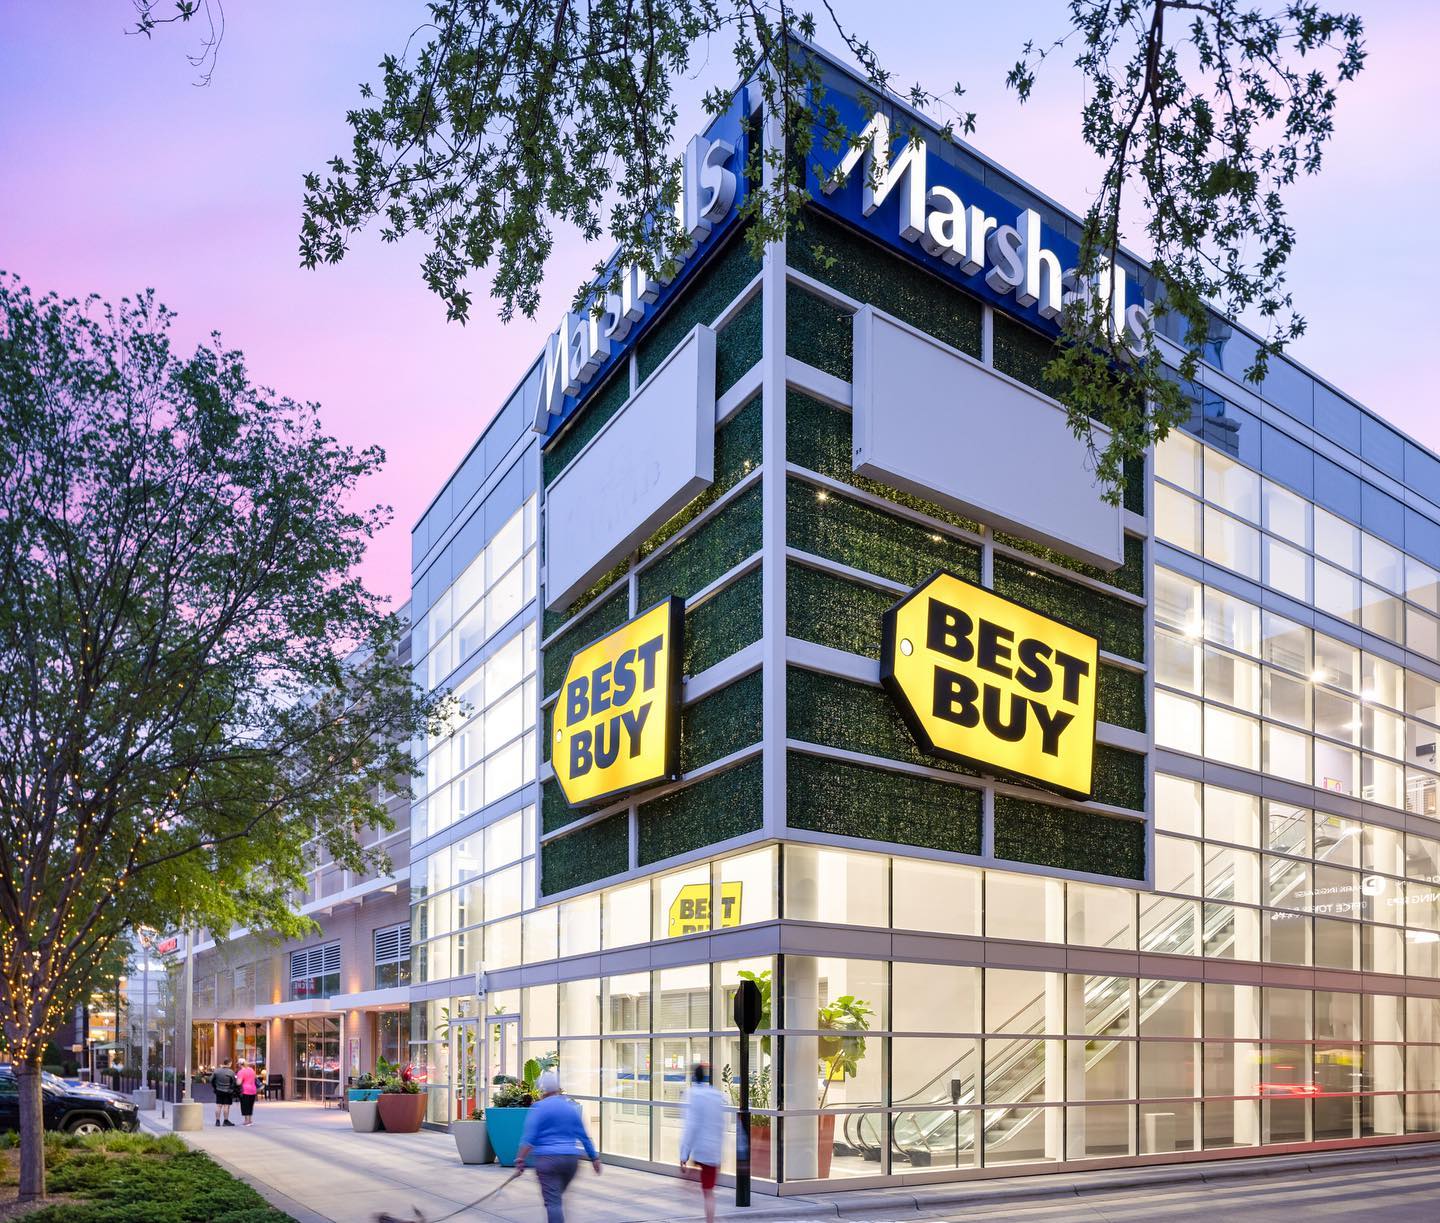 Calling all last minute shoppers: Best Buy has a ton of great gifts to celebrate a father figure in your life this Sunday. A few suggestions from their official gift guide:

 Noise cancelling headphones
 A smart watch 
‍♂️ A neck massager
🔈 New speakers for the house
📸 A new camera to capture those family memories

How are you celebrating your dad this weekend?